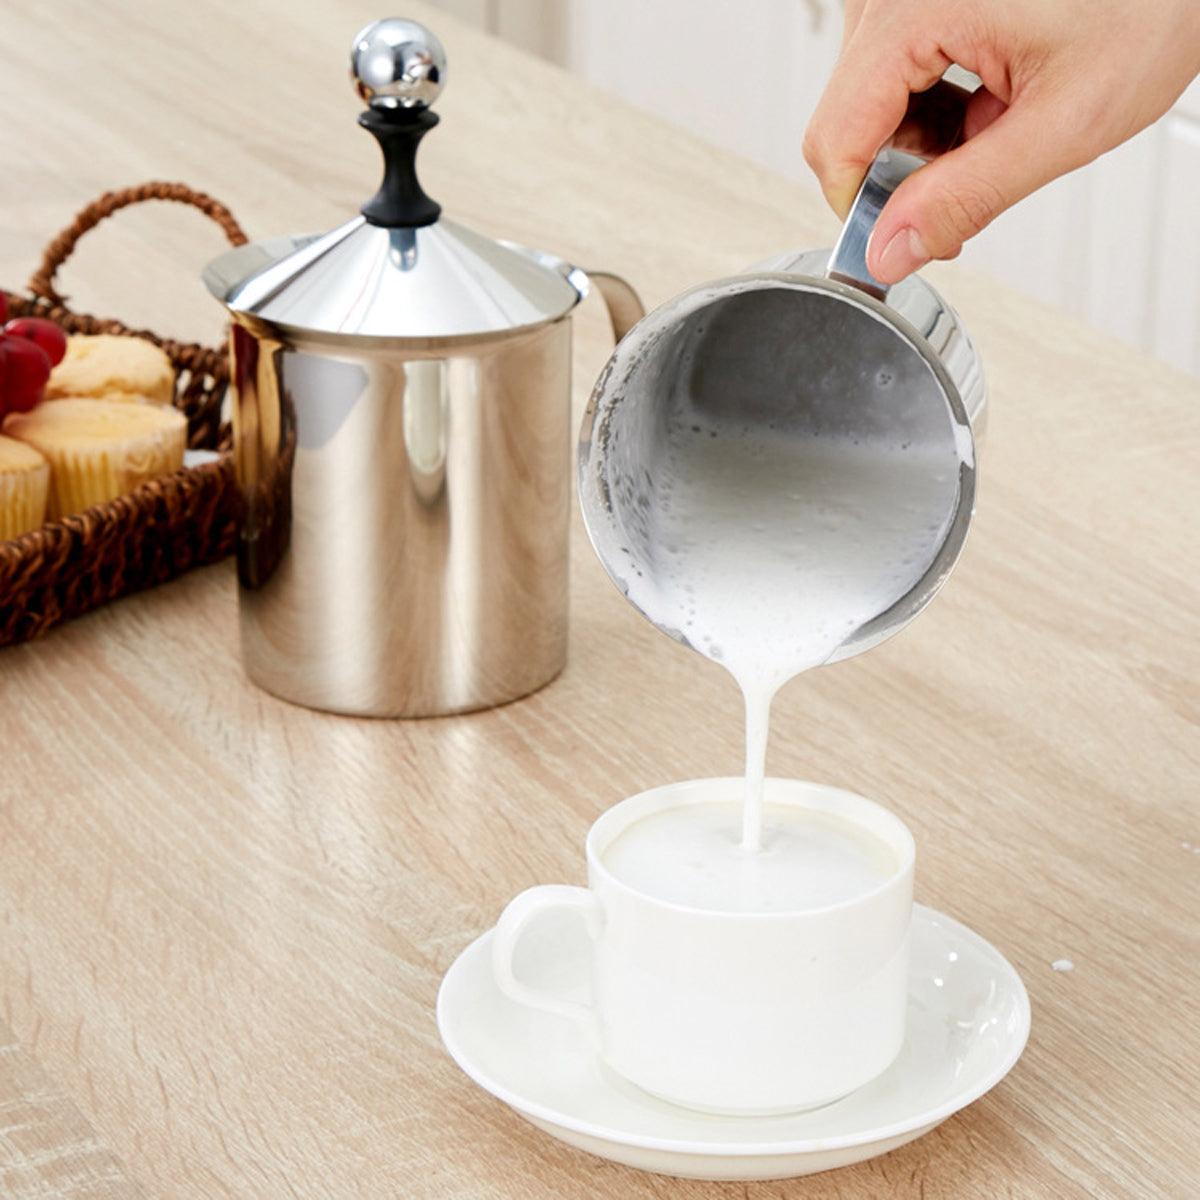 Manual Handheld Milk Frother Foamer Mixer Stainless Steel Coffee